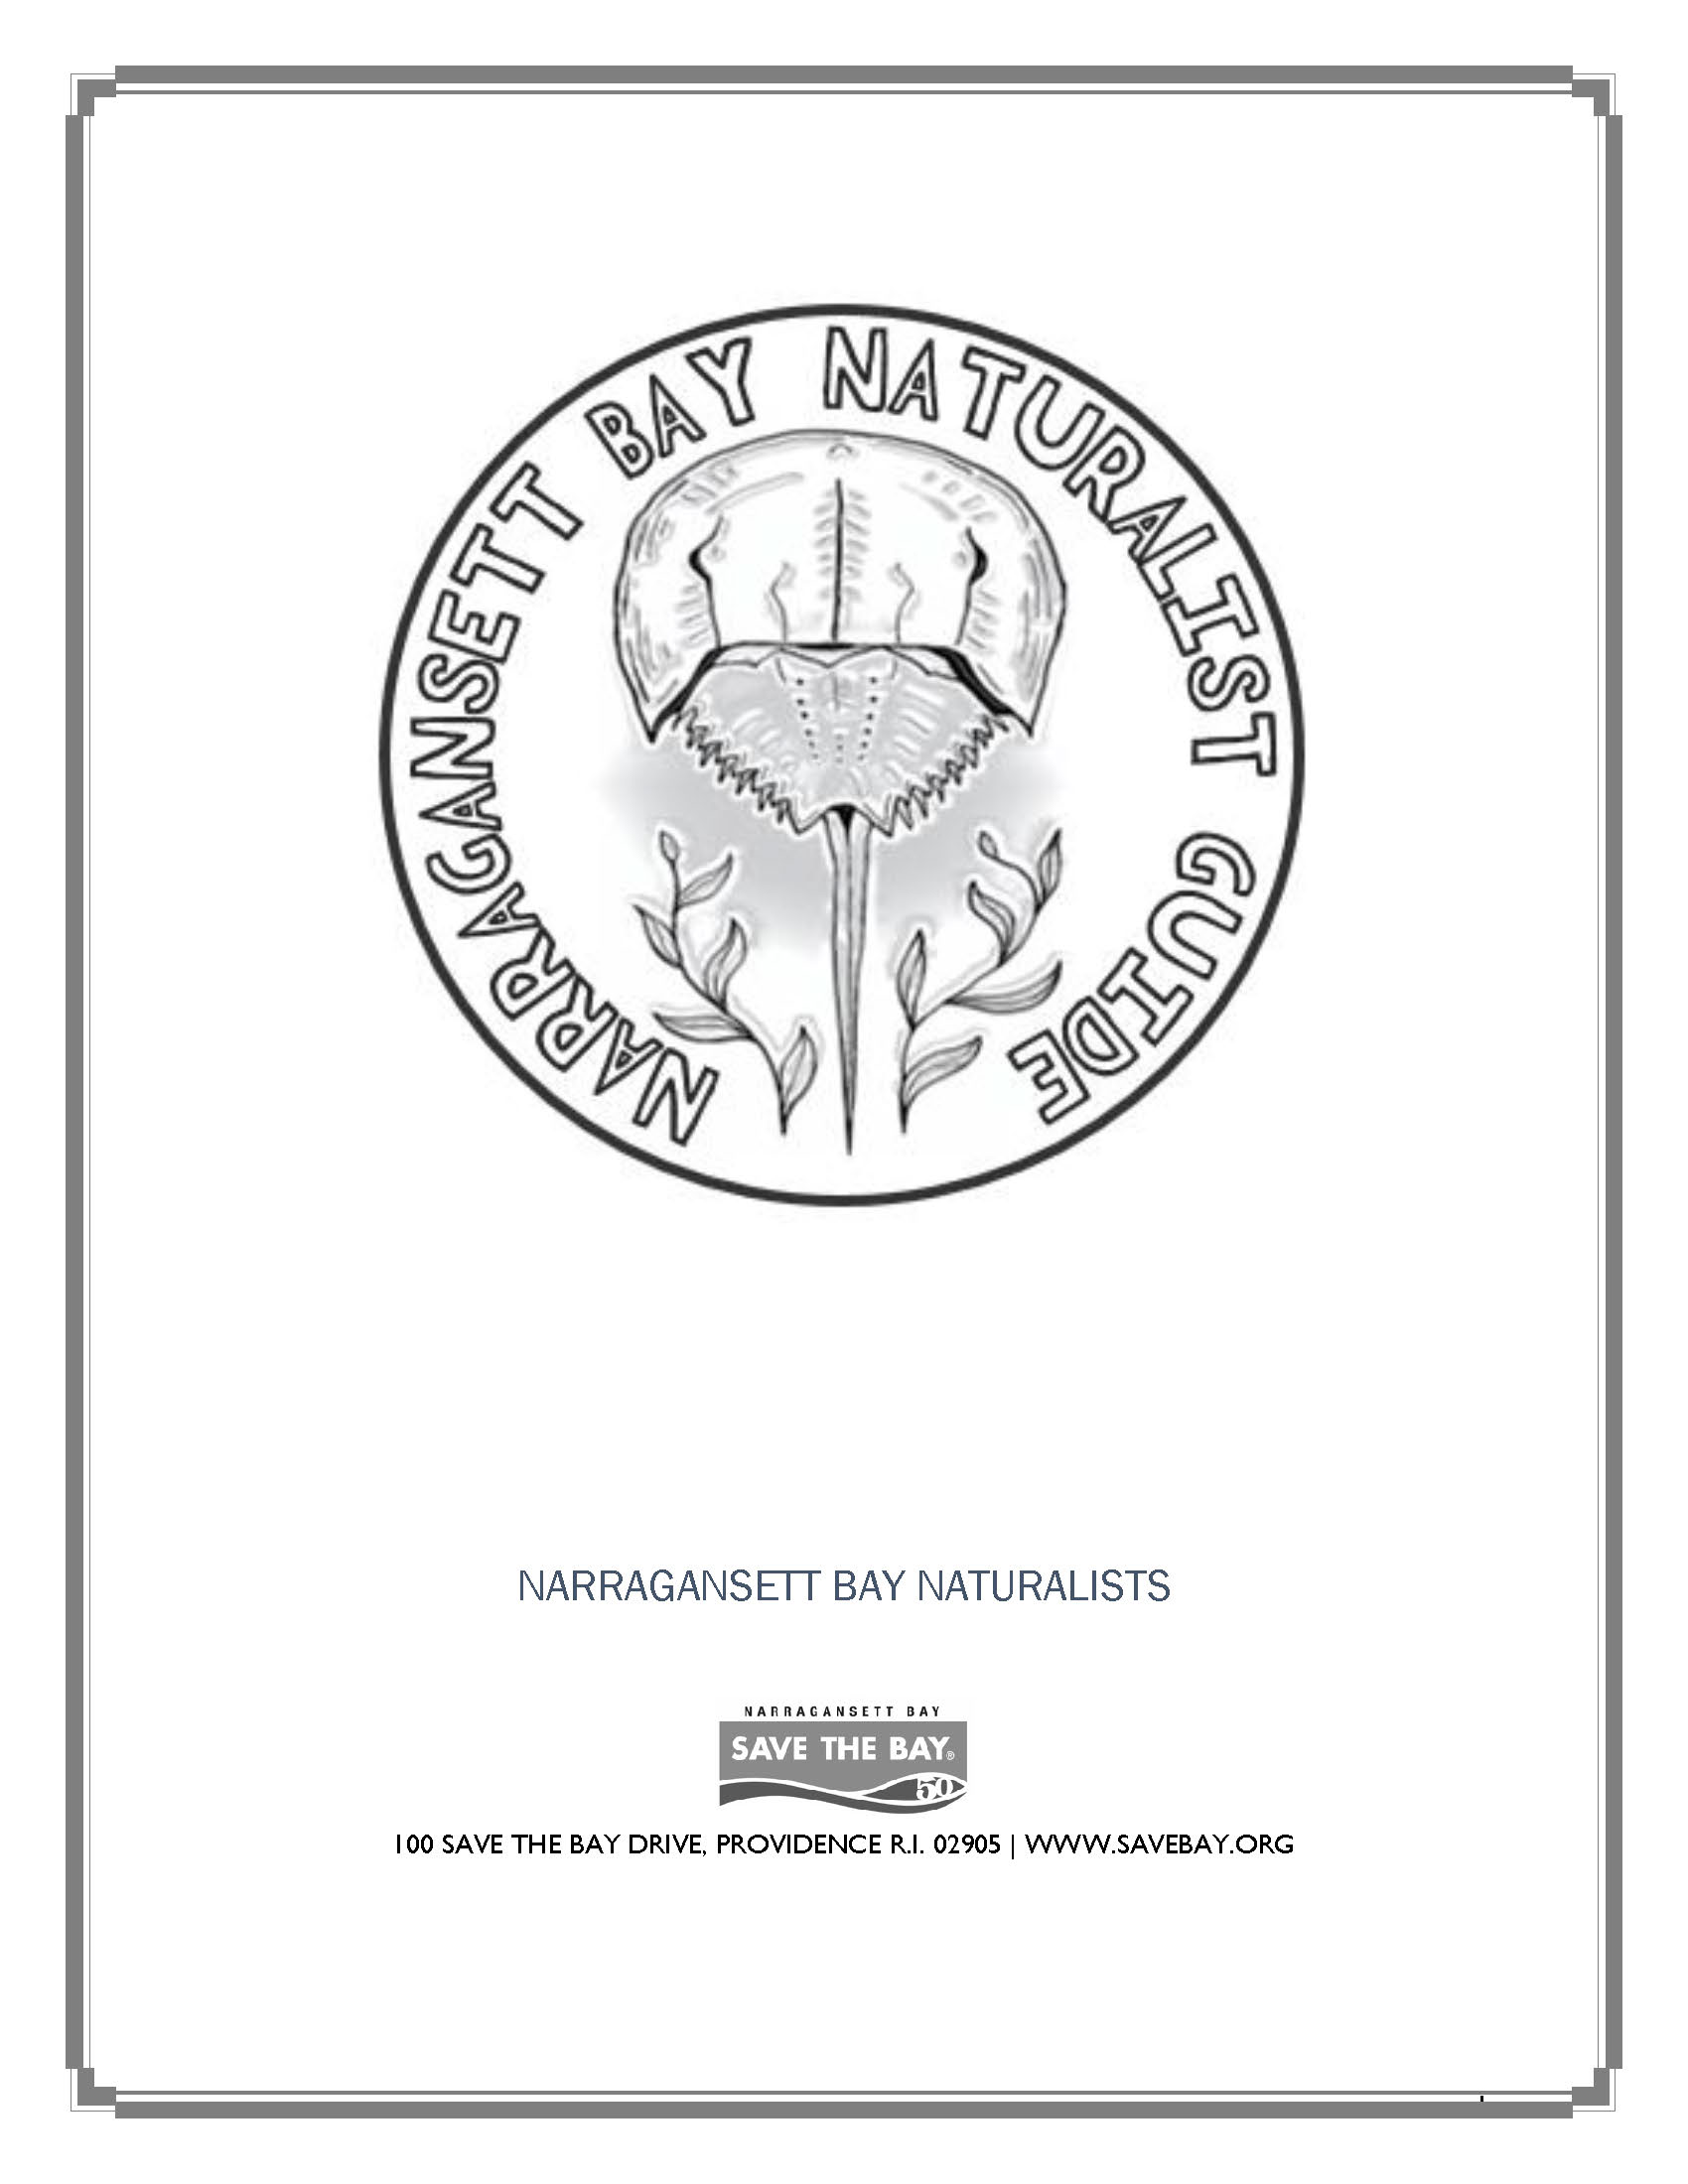 The cover of the Narragansett Bay Naturalist Guide